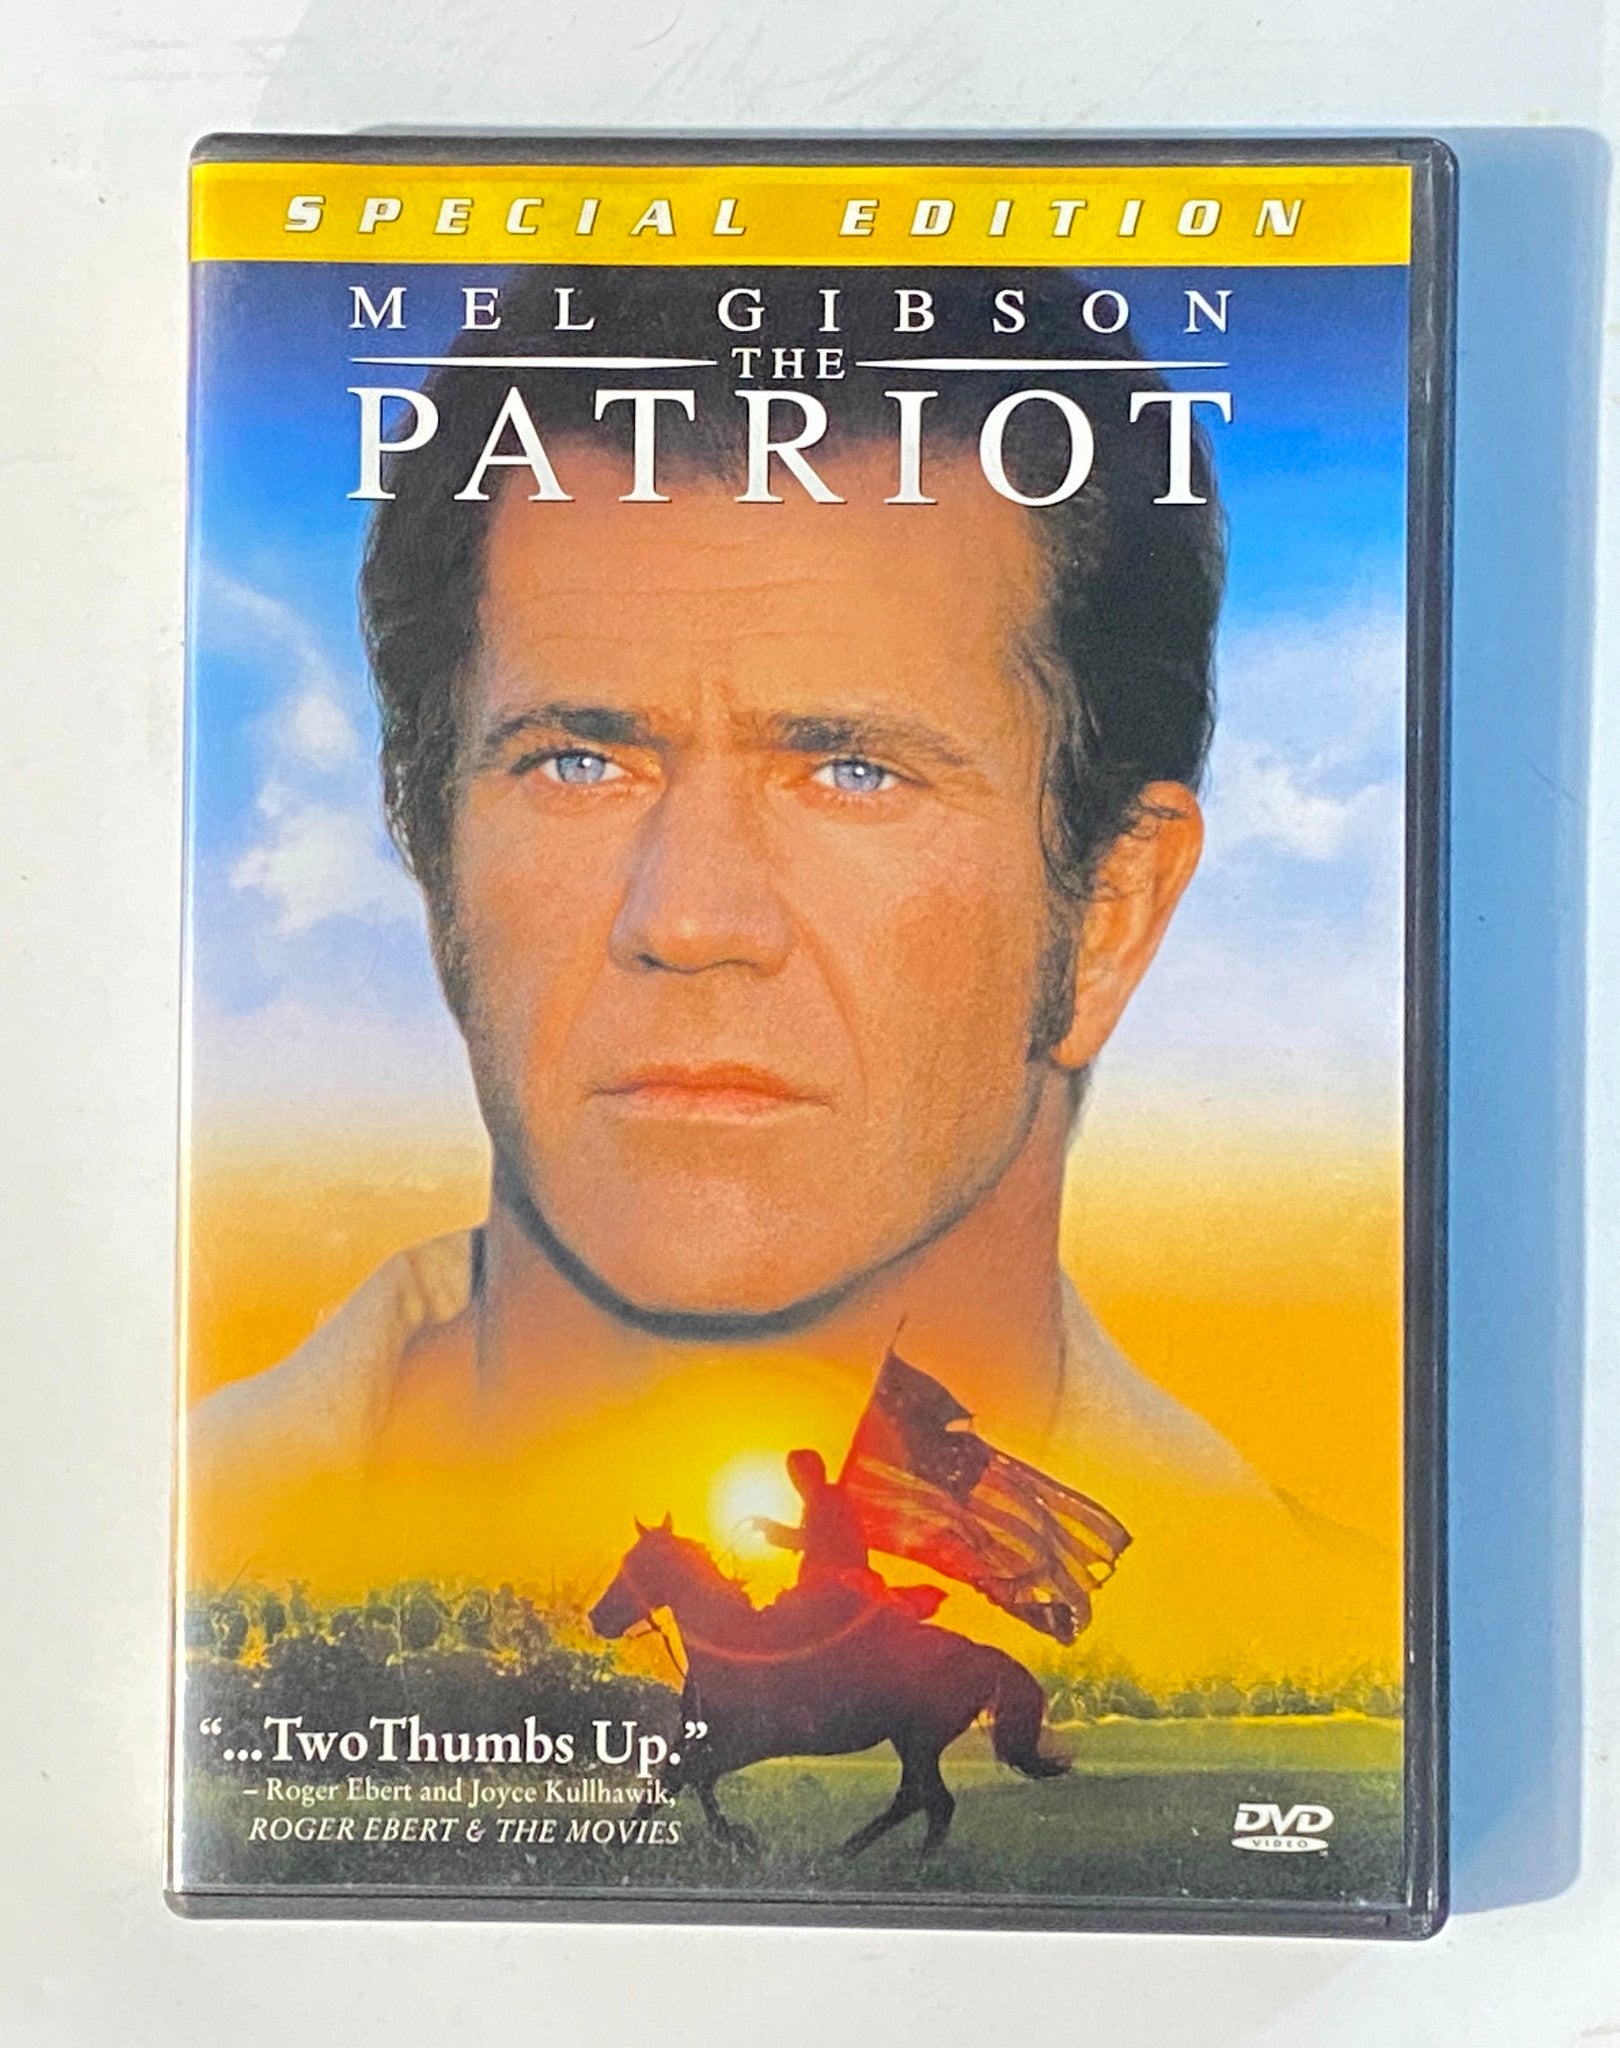 The Patriot DVD Used Movie Mel Gibson